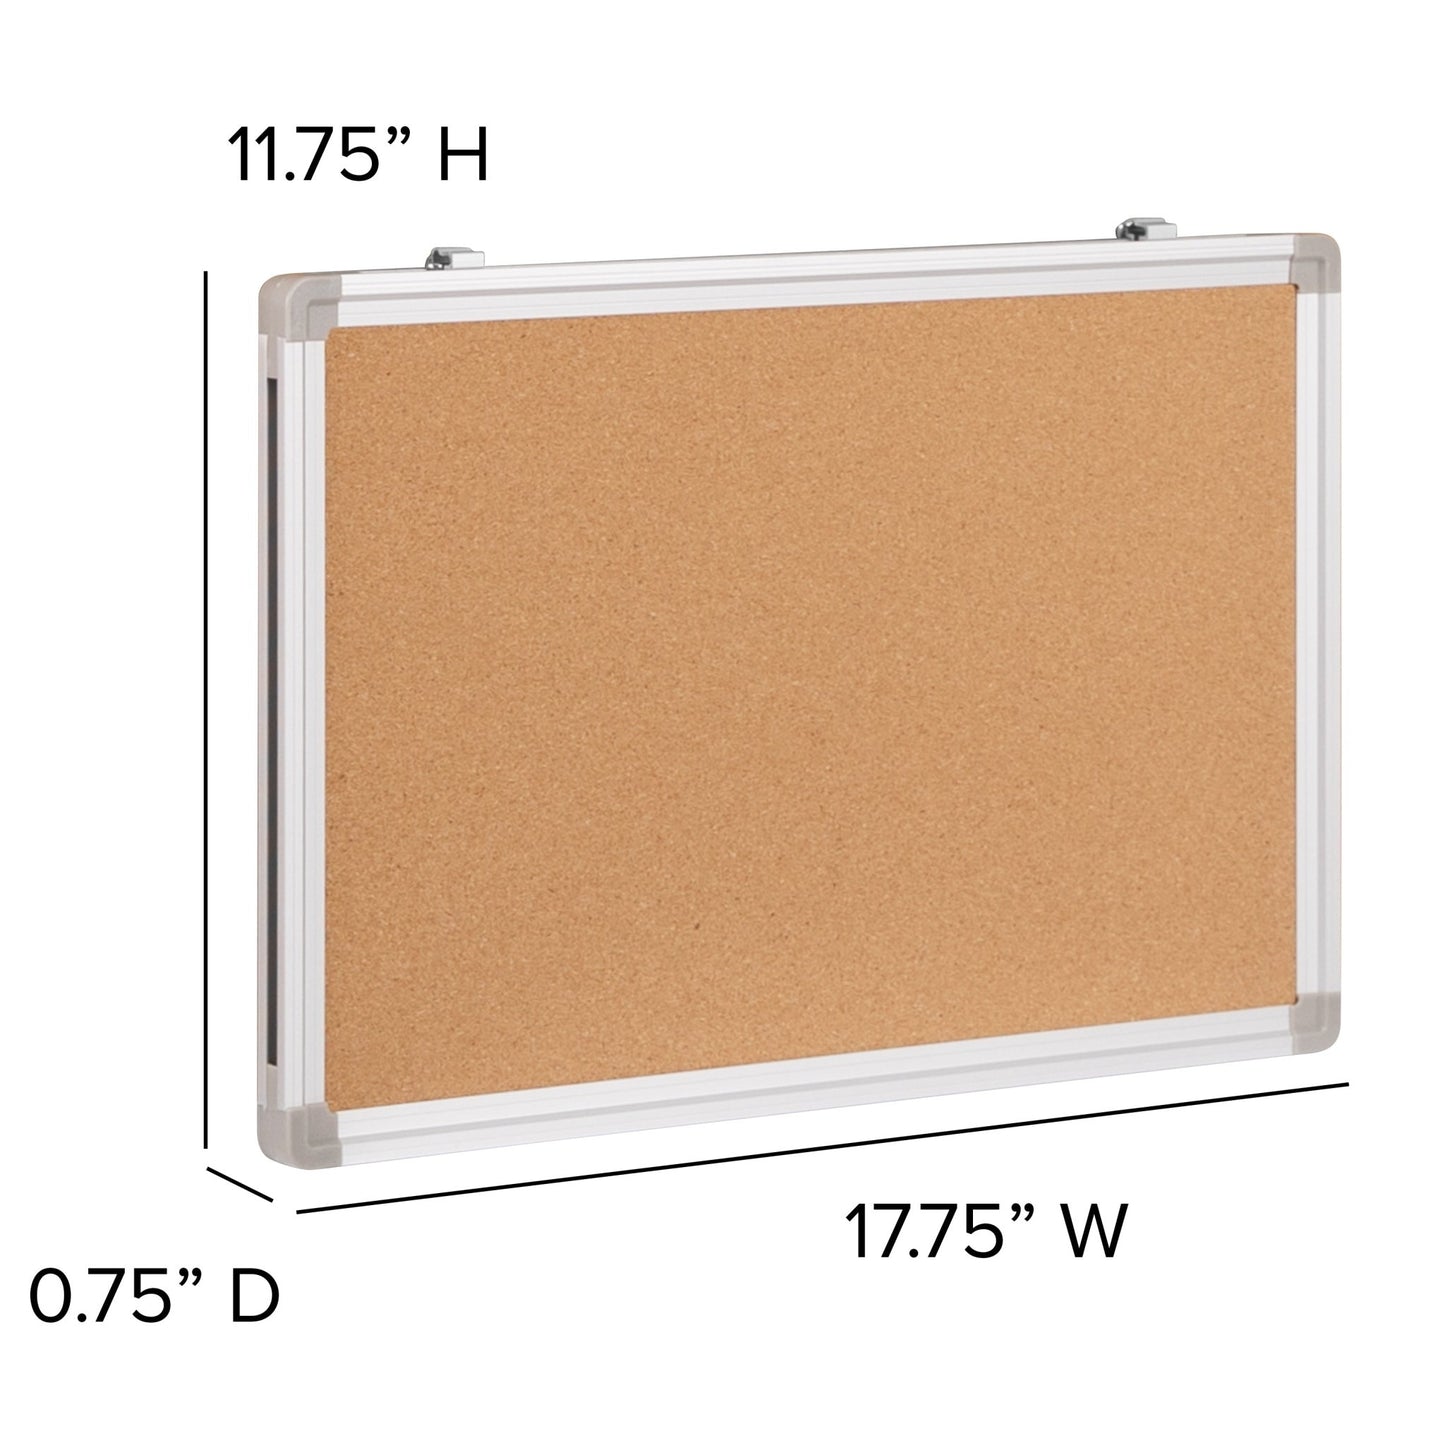 HERCULES Series 17.75"W x 11.75"H Personal Sized Natural Cork Board with Aluminum Frame - SchoolOutlet